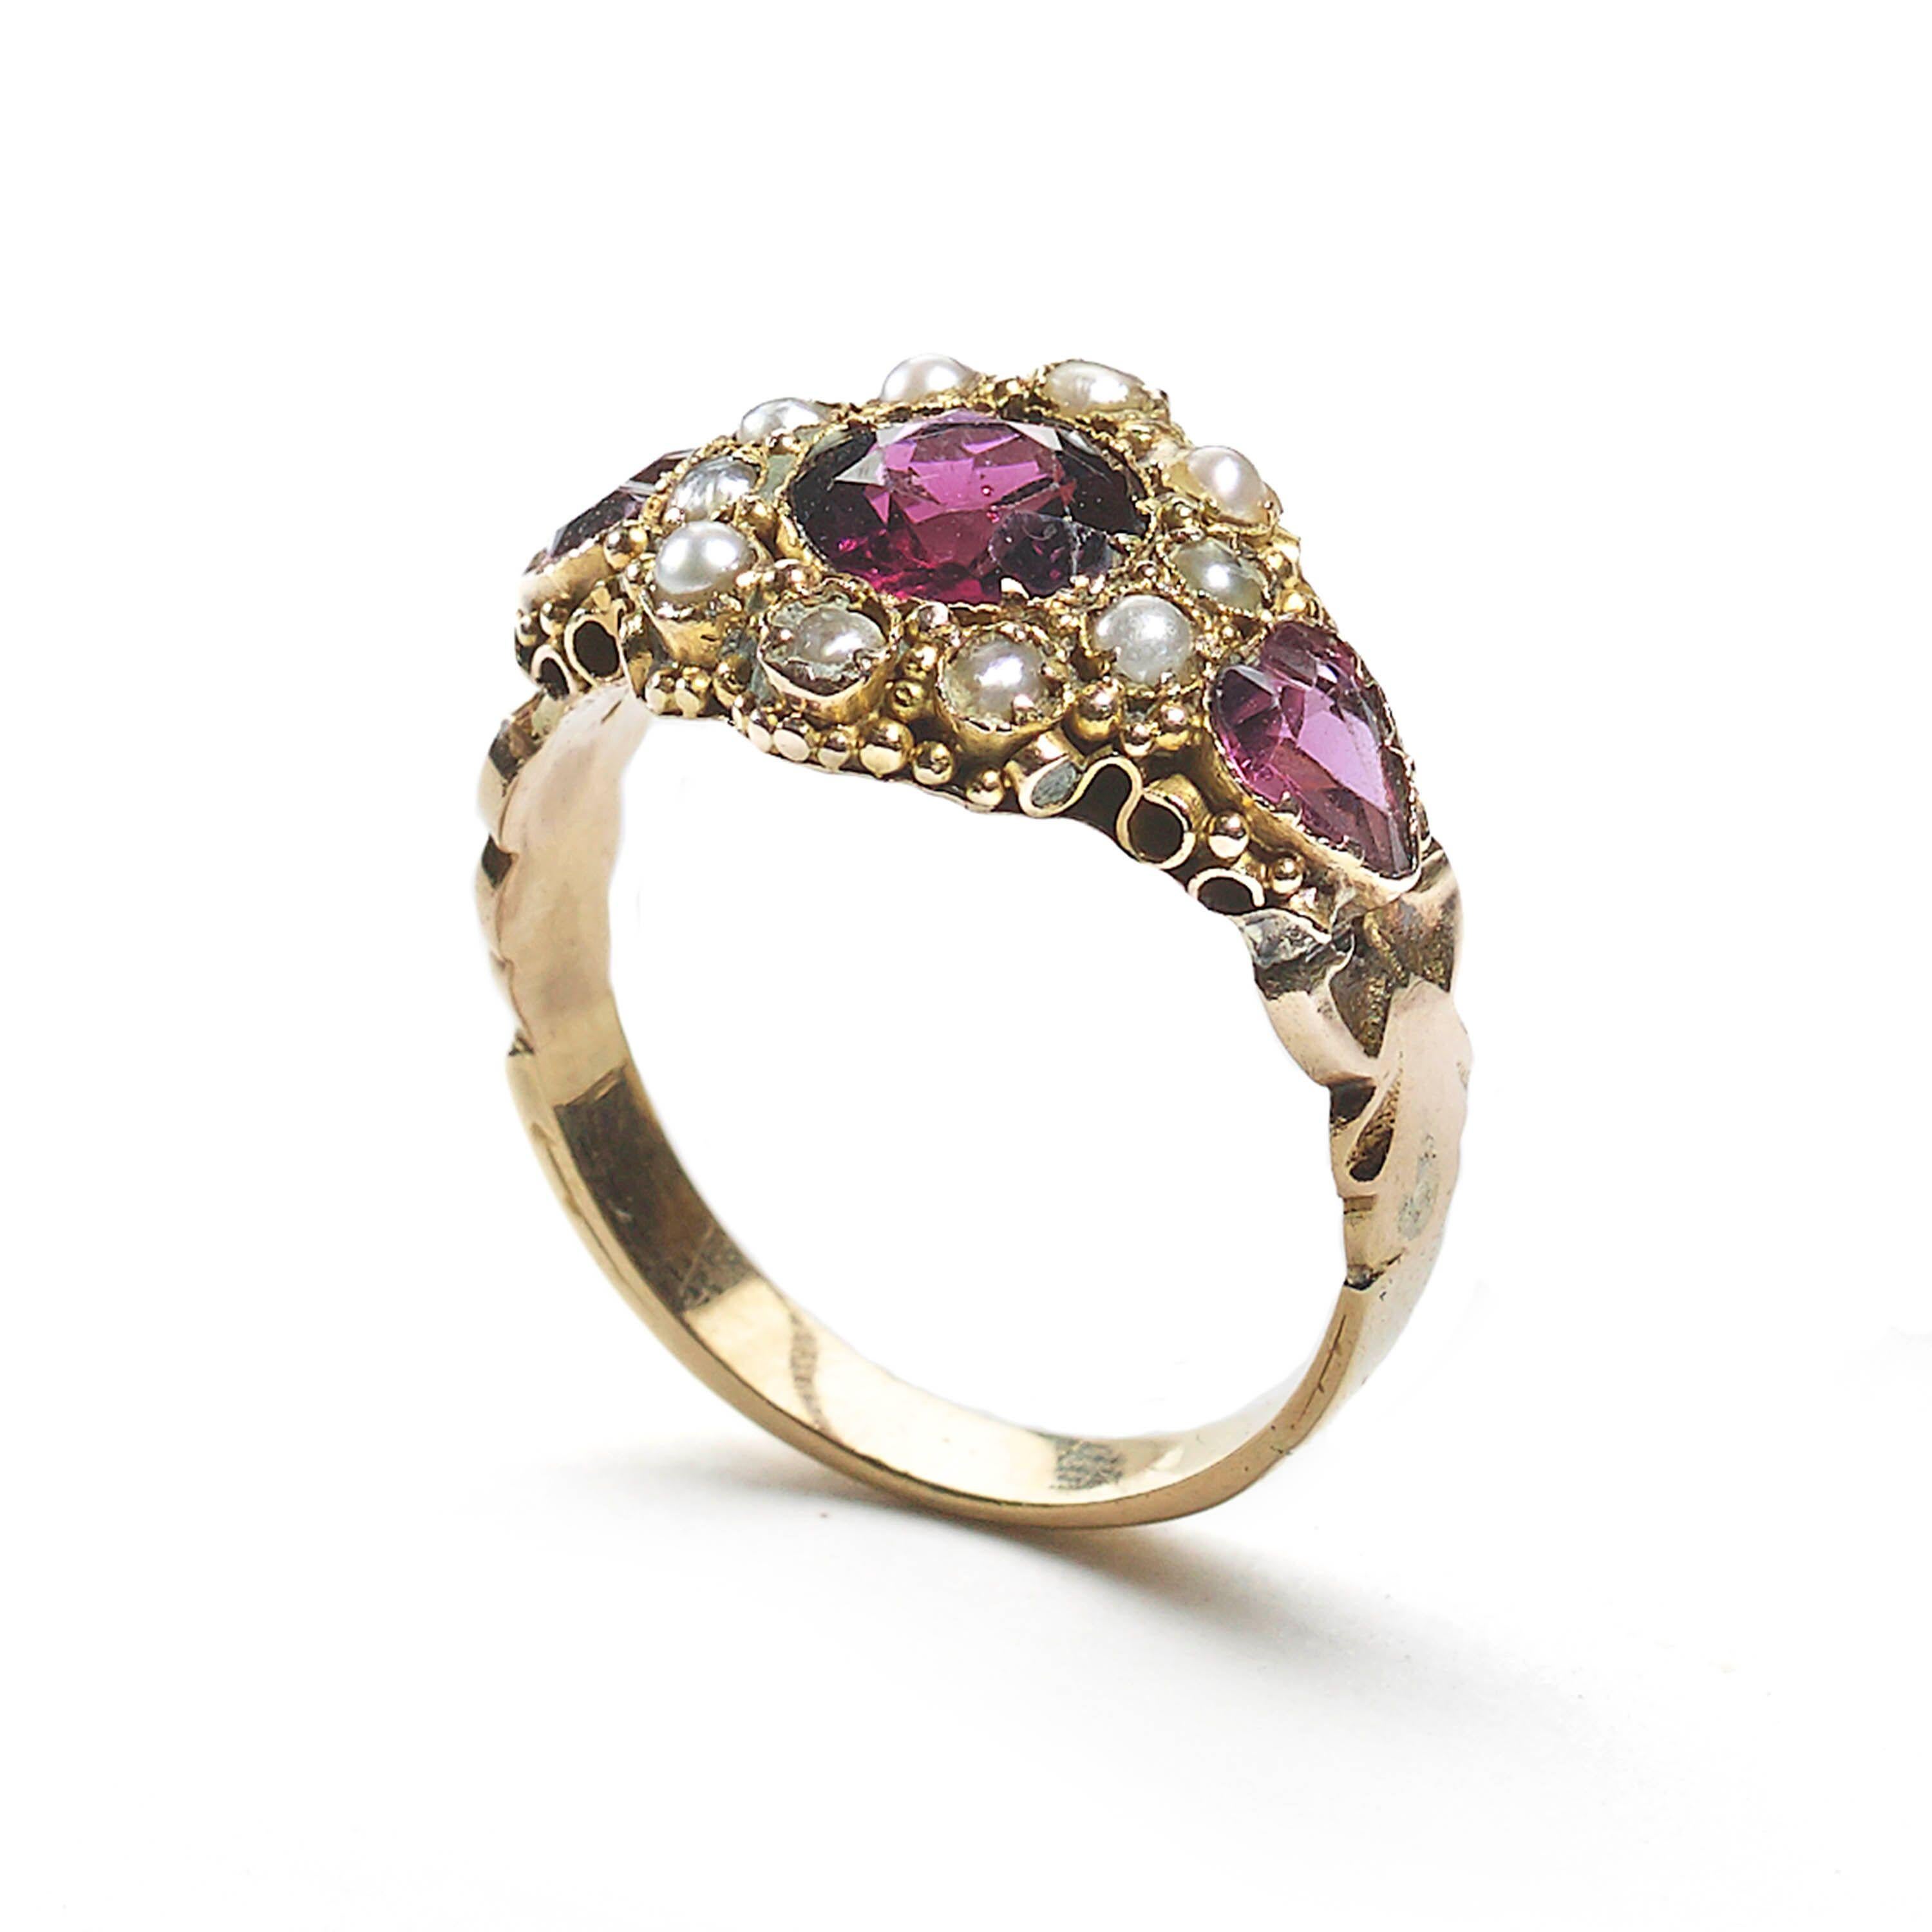 A Georgian almandine garnet and pearl ring, with a central round, faceted garnet, surrounded by ten, half seed pearls, with a heart-shaped garnet set in each shoulder, with granulated decoration, mounted in gold, with a chased  and engraved shank.